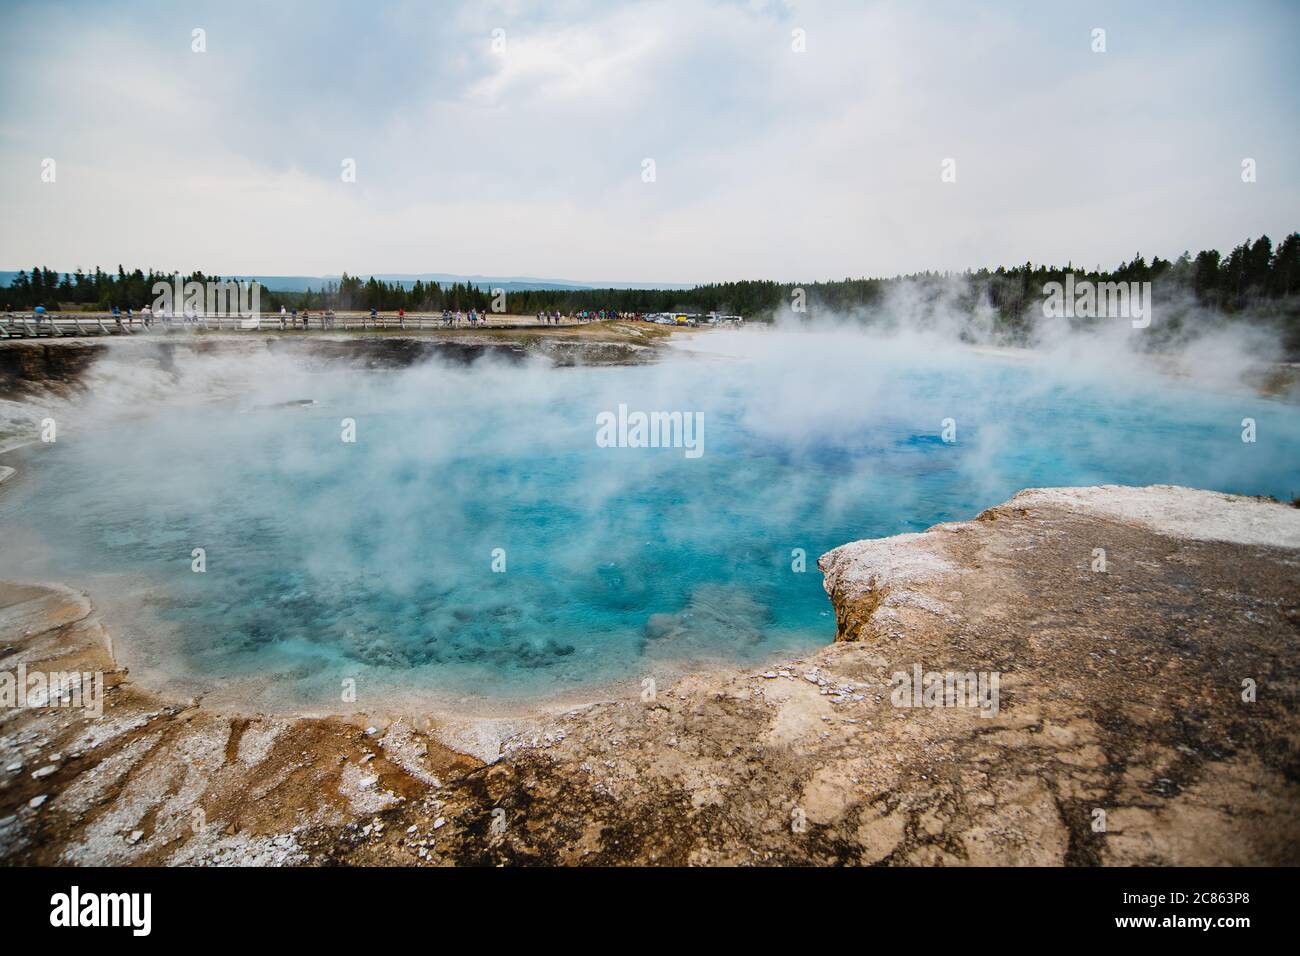 Geothermal pool in Yellowstone National Park, Wyoming Stock Photo